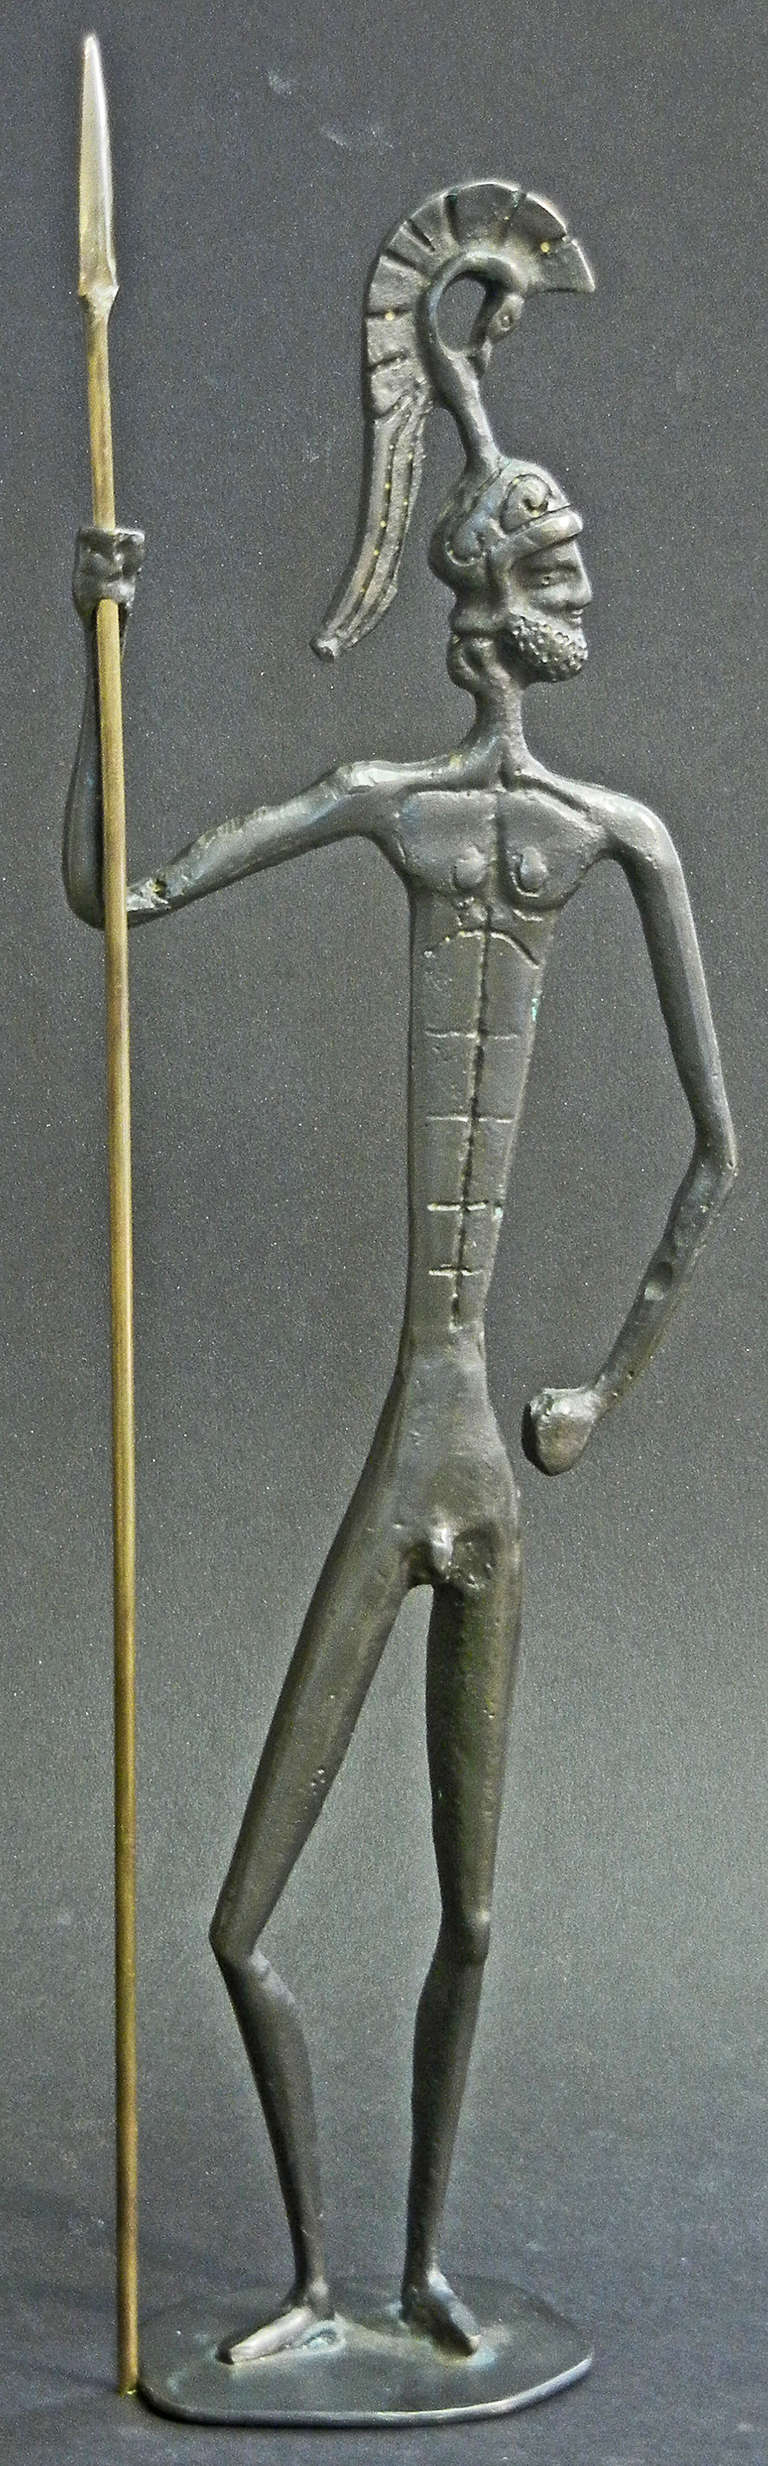 Showing the twin influences of pre-Classical Greek sculpture and Diego Giacometti, this attenuated bronze sculpture of a nude Greek soldier, complete with brass spear, was the mid-century equivalent of a Grand Tour bronze, collected by visitors and